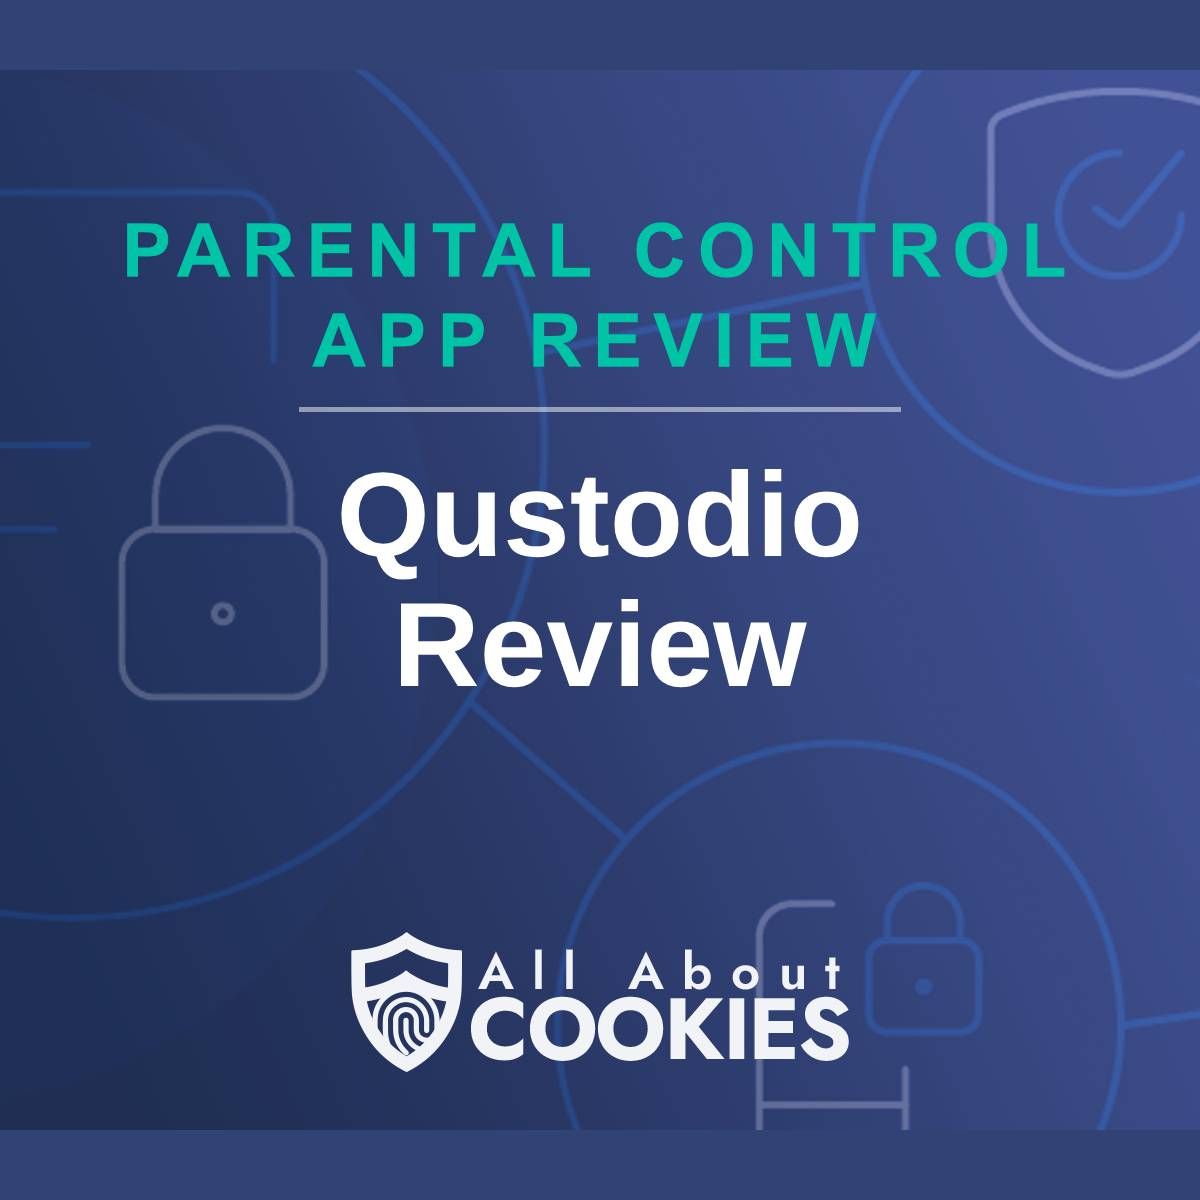 A blue background with images of locks and shields with the text &quot;Parental Control App Review Qustodio Review&quot; and the All About Cookies logo.